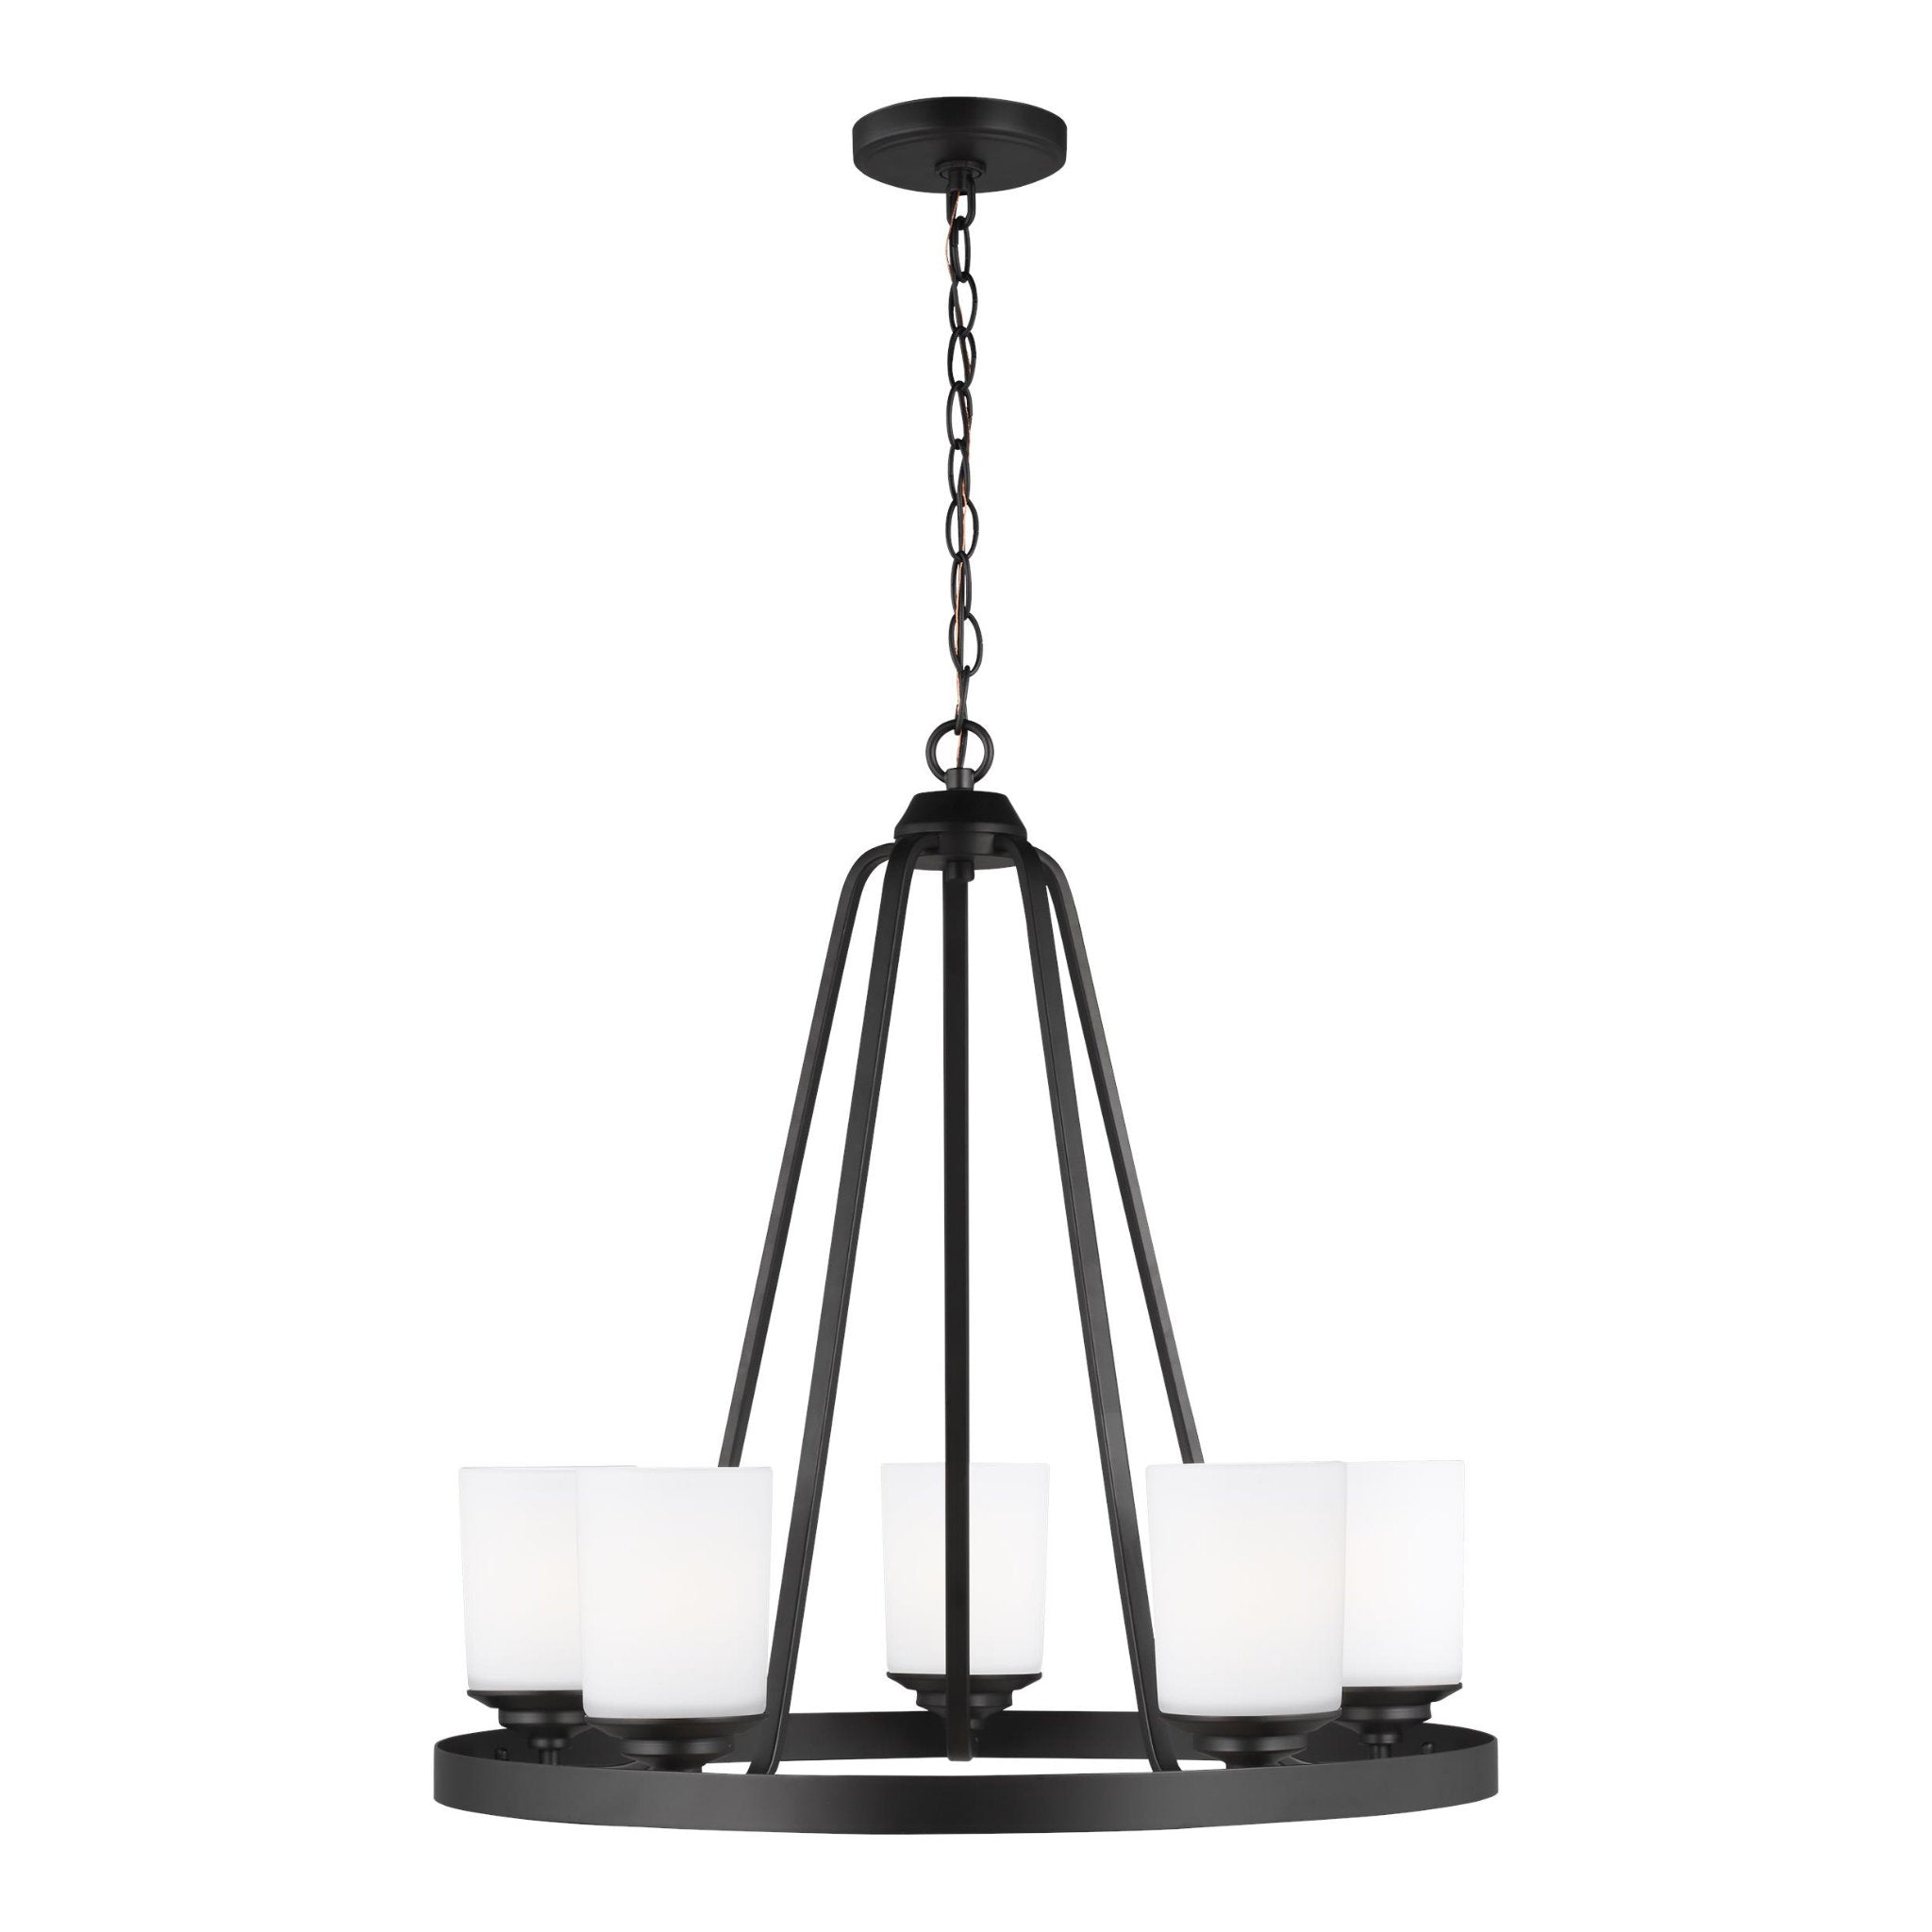 Kemal Five Light Chandelier Transitional 24" Height Steel Round Etched / White Inside Shade in Midnight Black